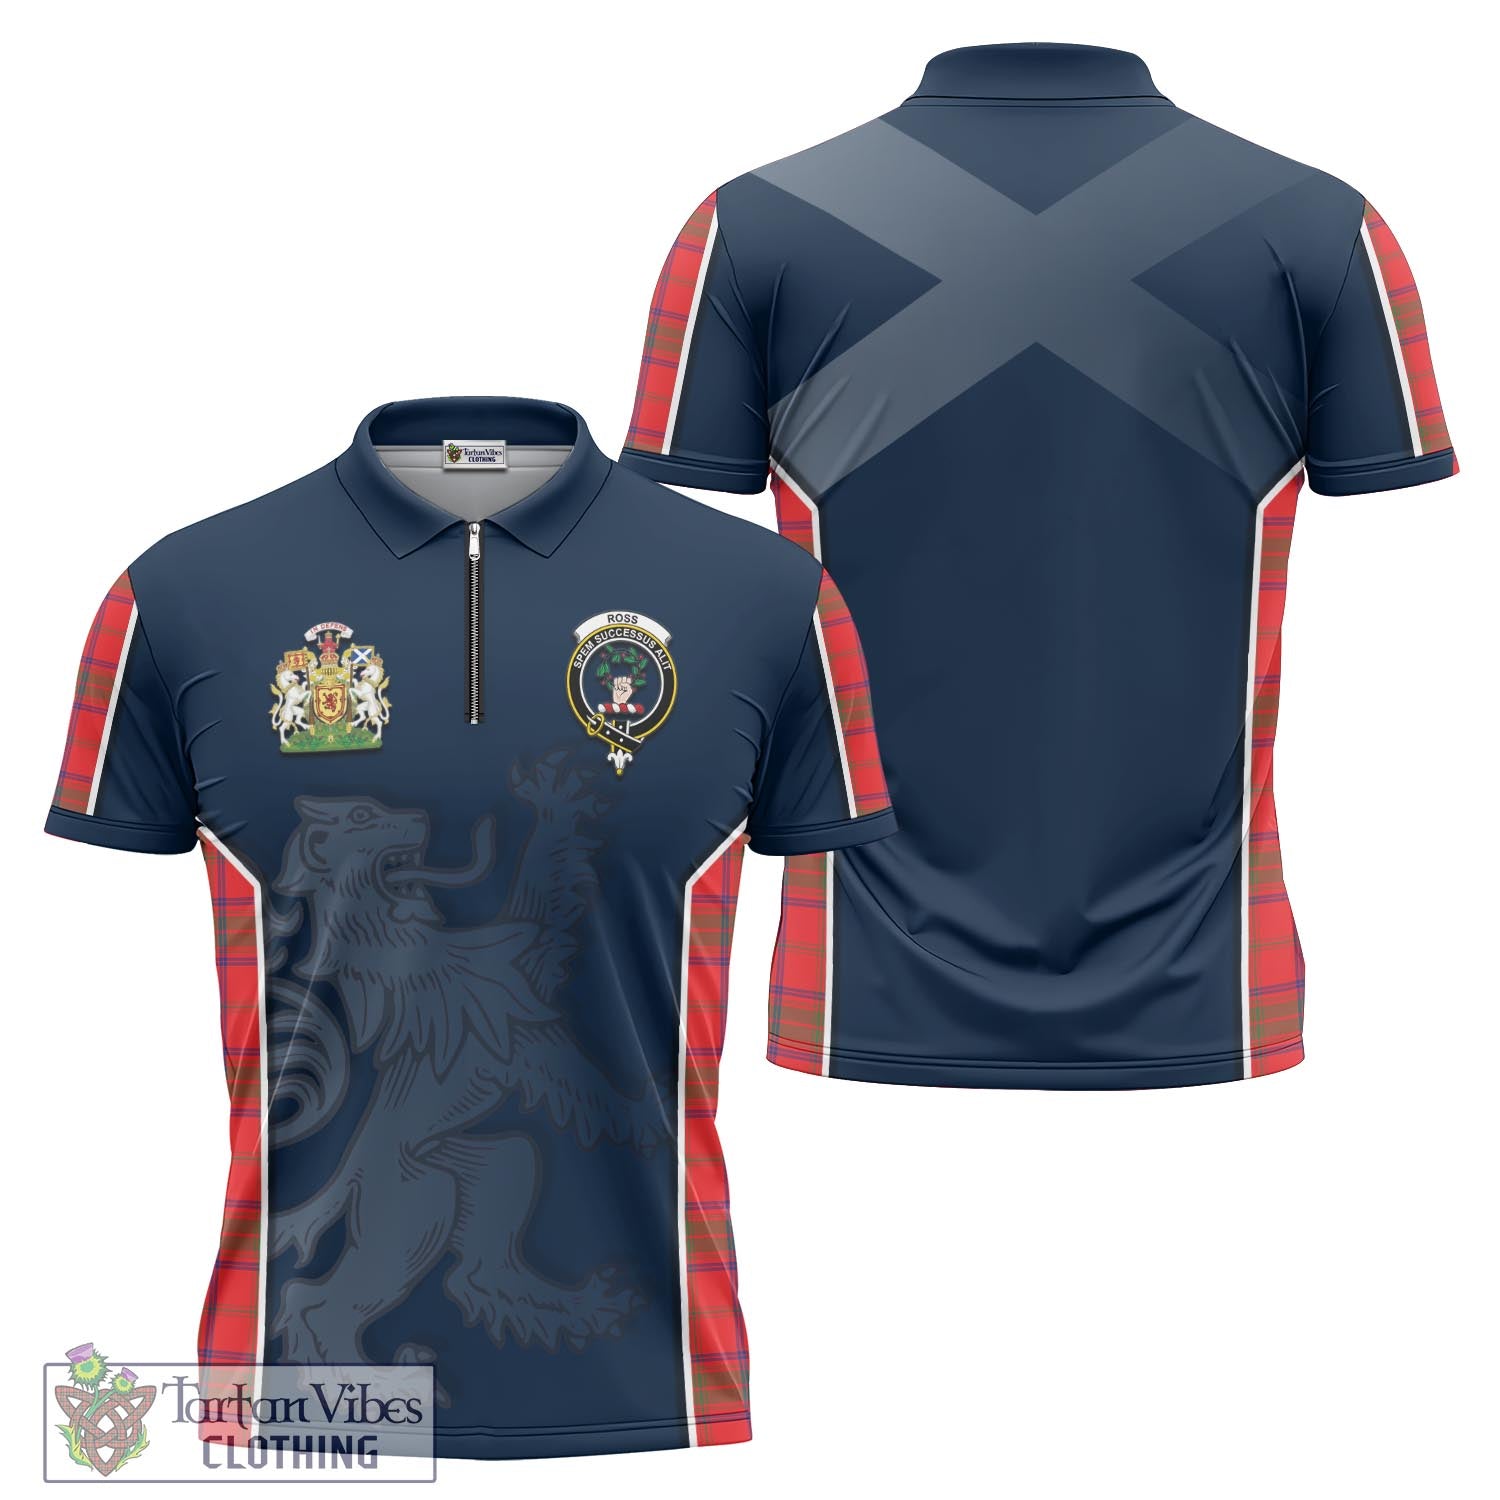 Tartan Vibes Clothing Ross Modern Tartan Zipper Polo Shirt with Family Crest and Lion Rampant Vibes Sport Style